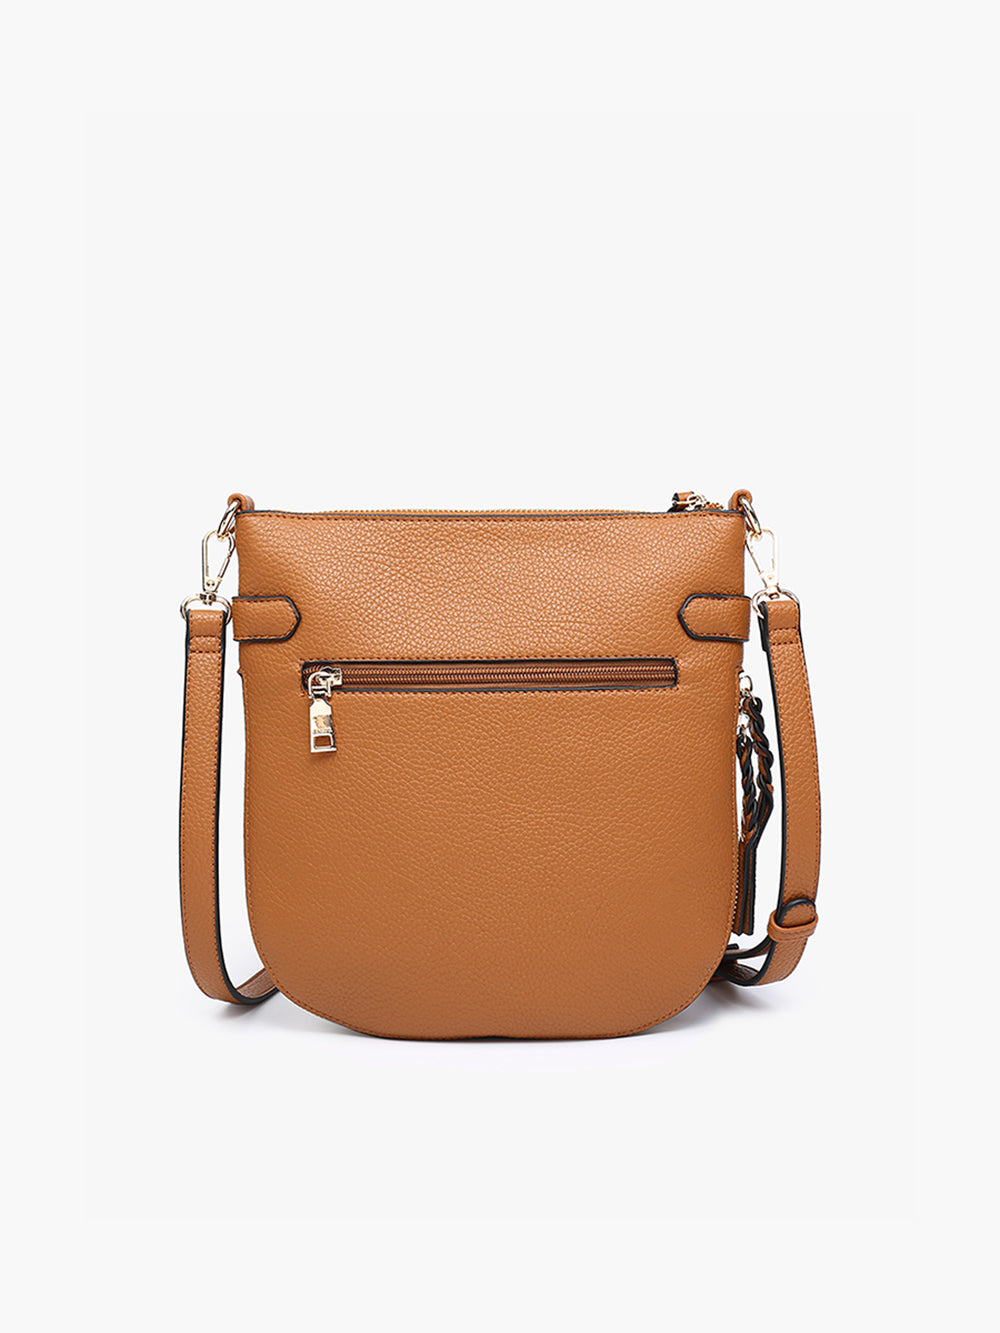 jen & co esther whipstitch round crossbody bag in brown vegan leather